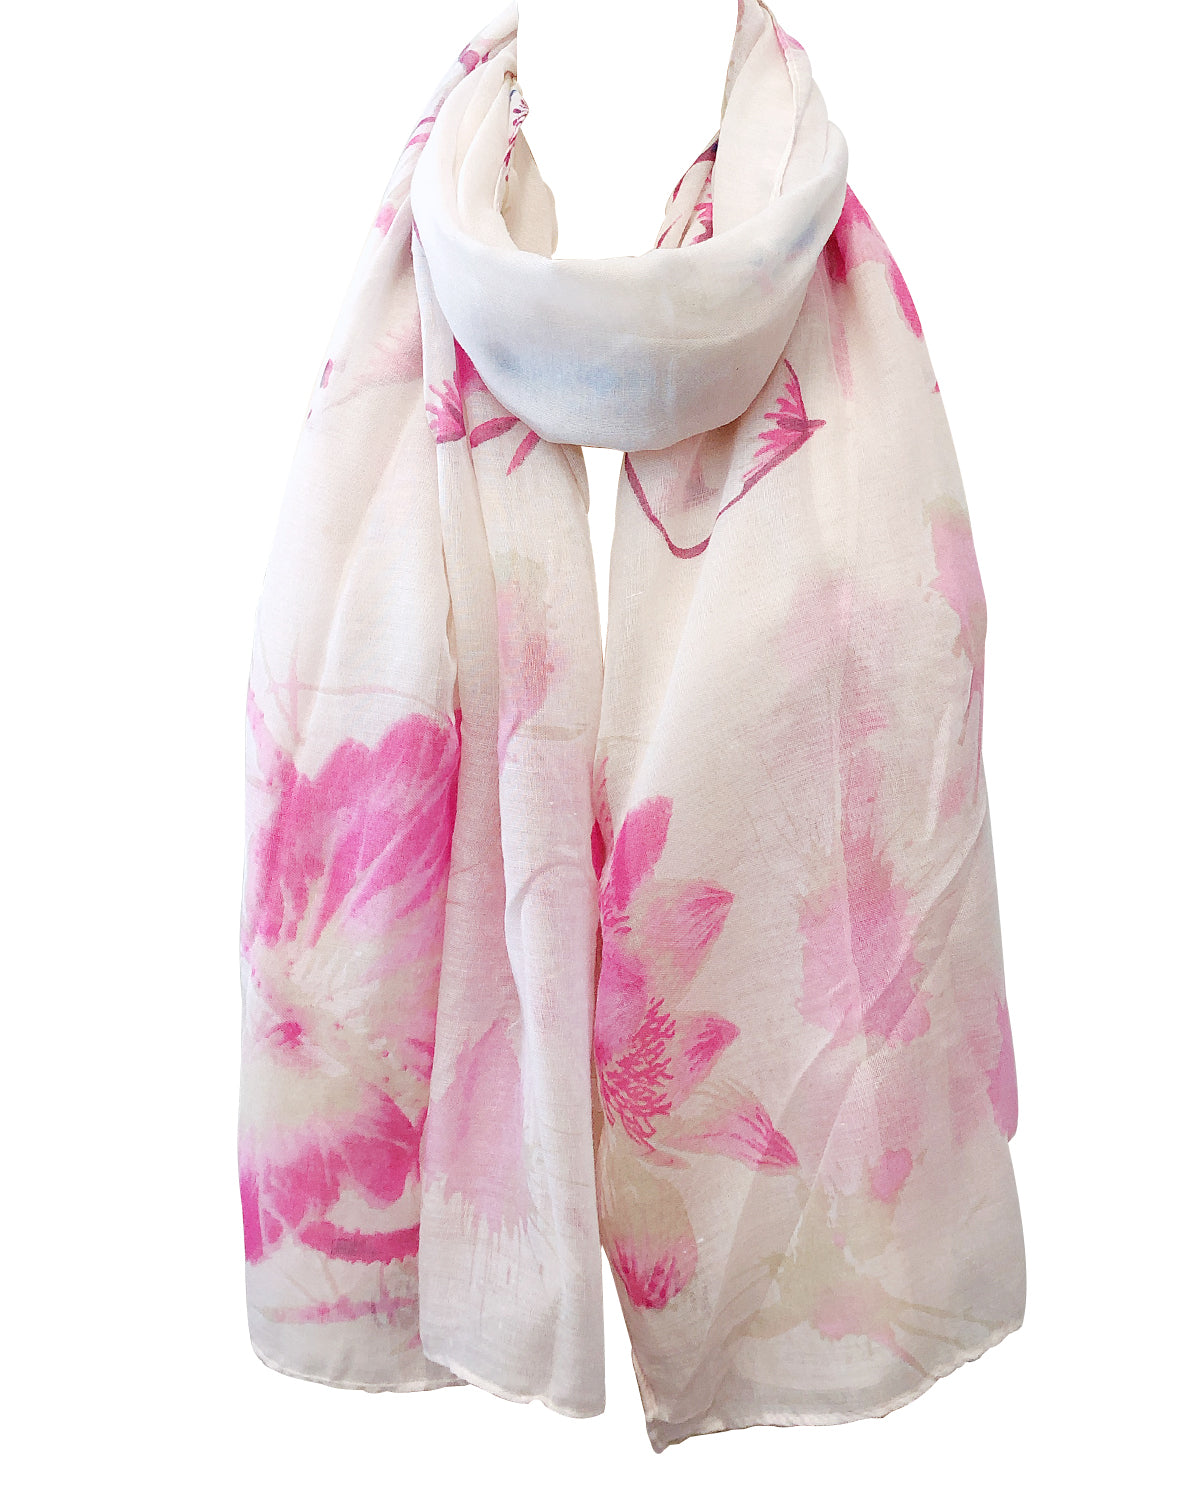 Wrapables Lightweight Poppy Floral Print Long Scarf